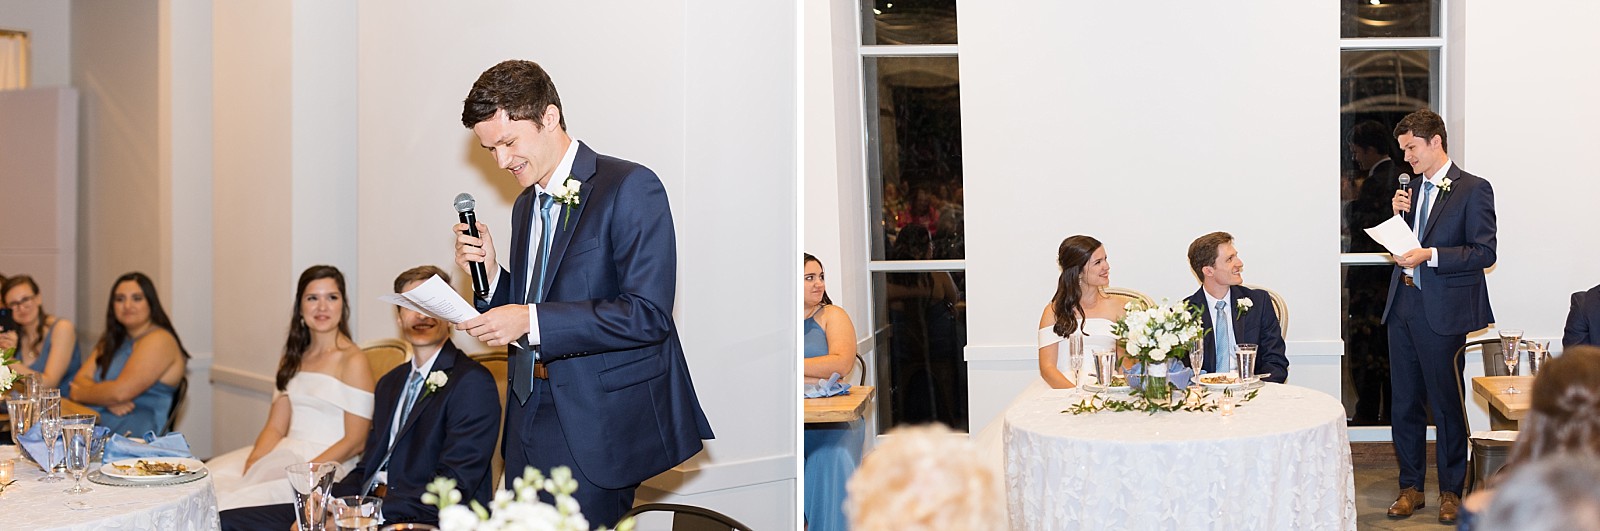 Best man giving his speech  | The Meadows in Raleigh | Raleigh NC Wedding Photographer